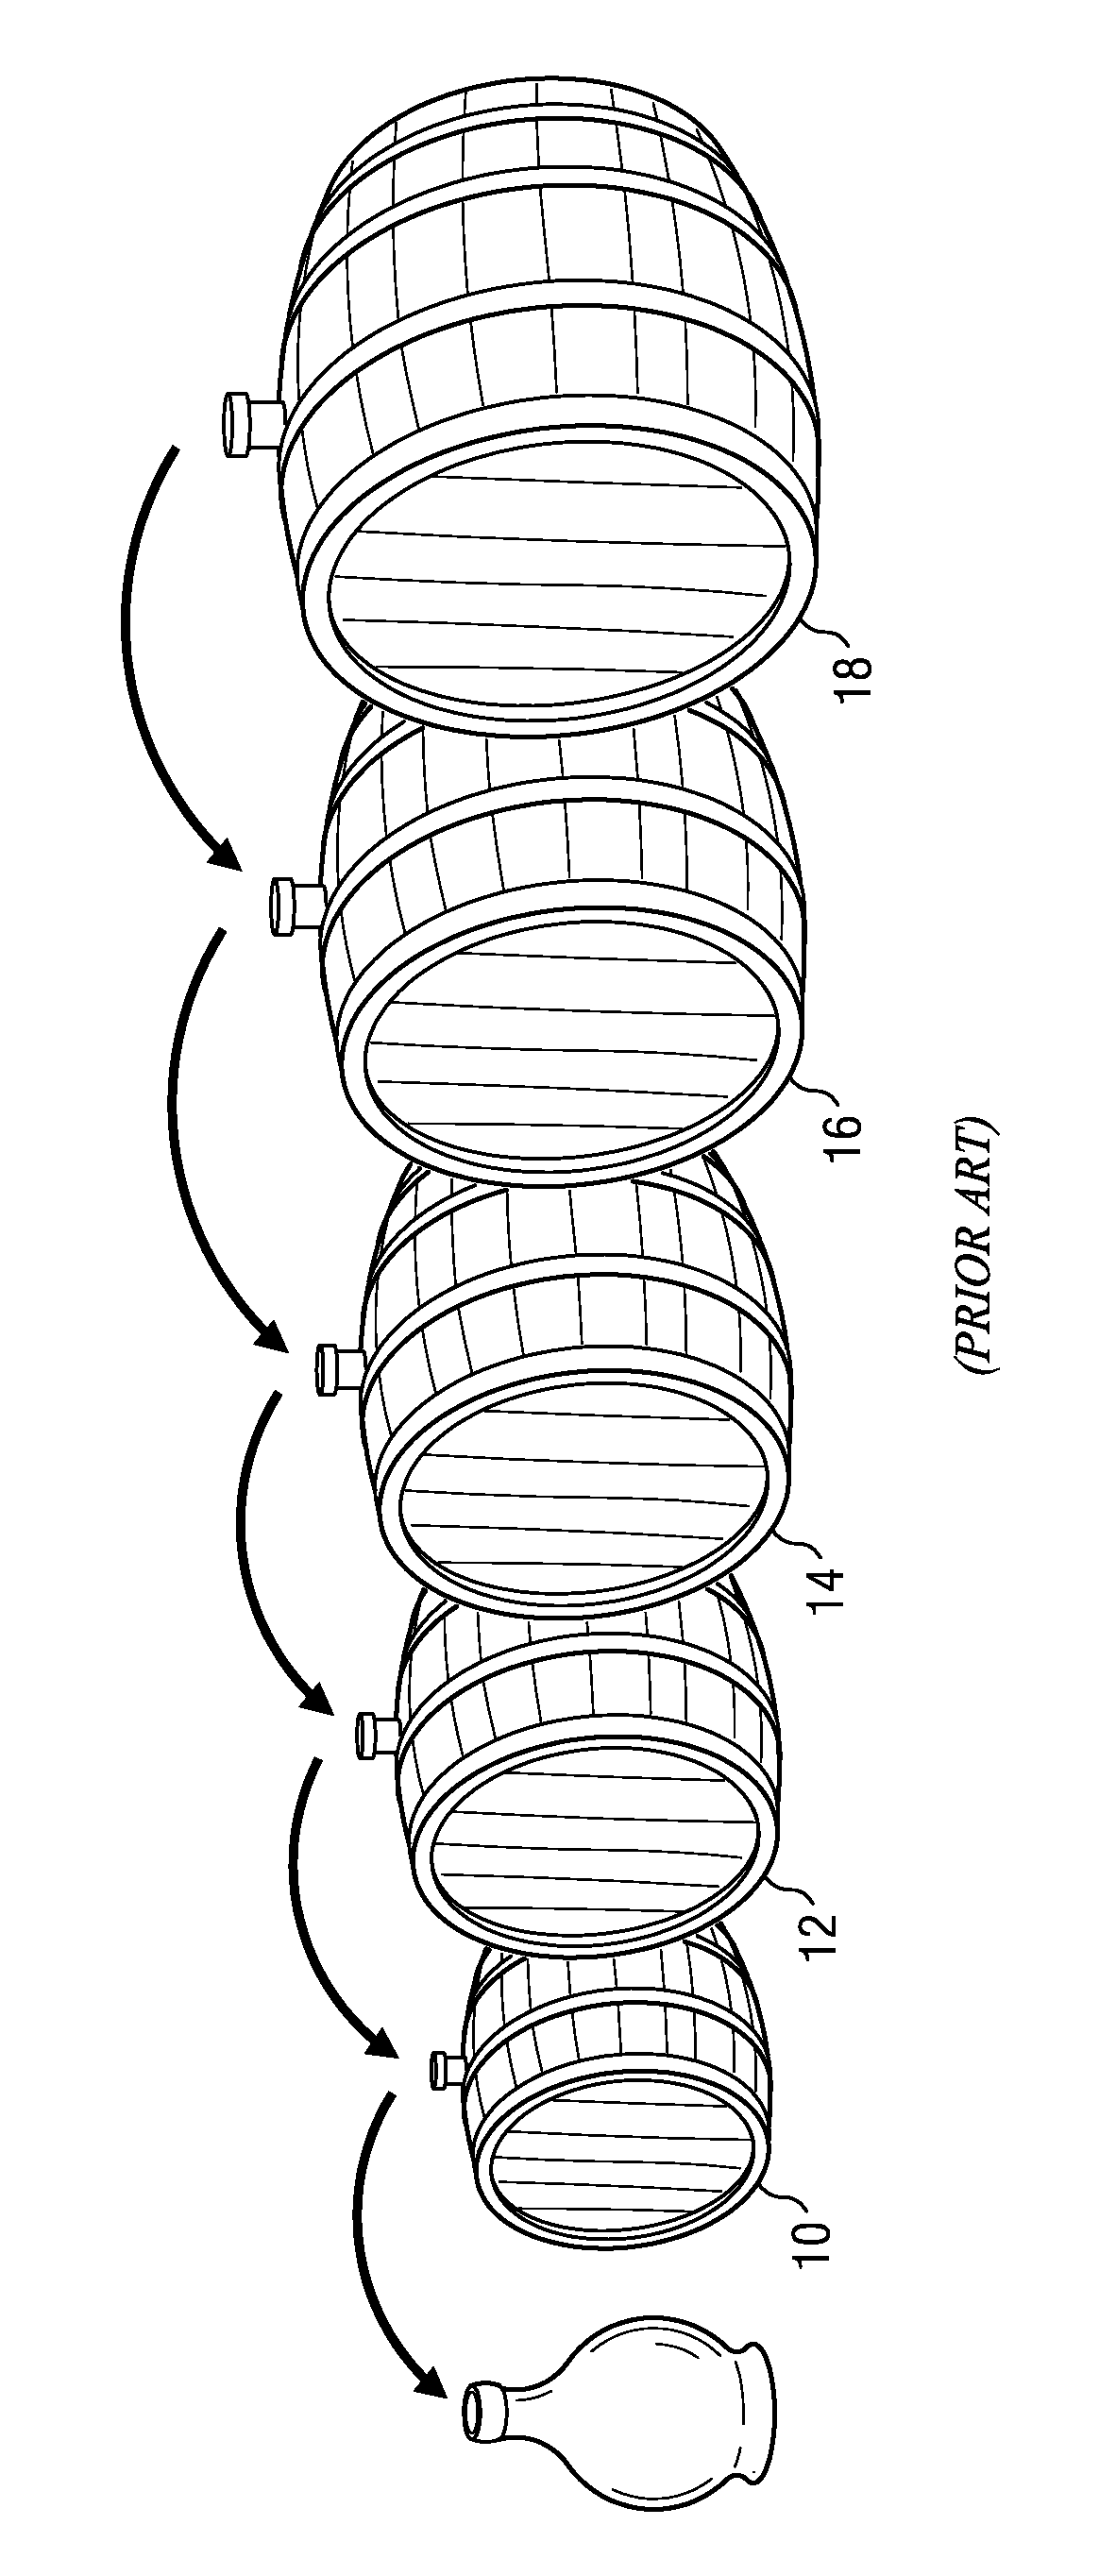 Flavouring Compositions and Methods for Making Same